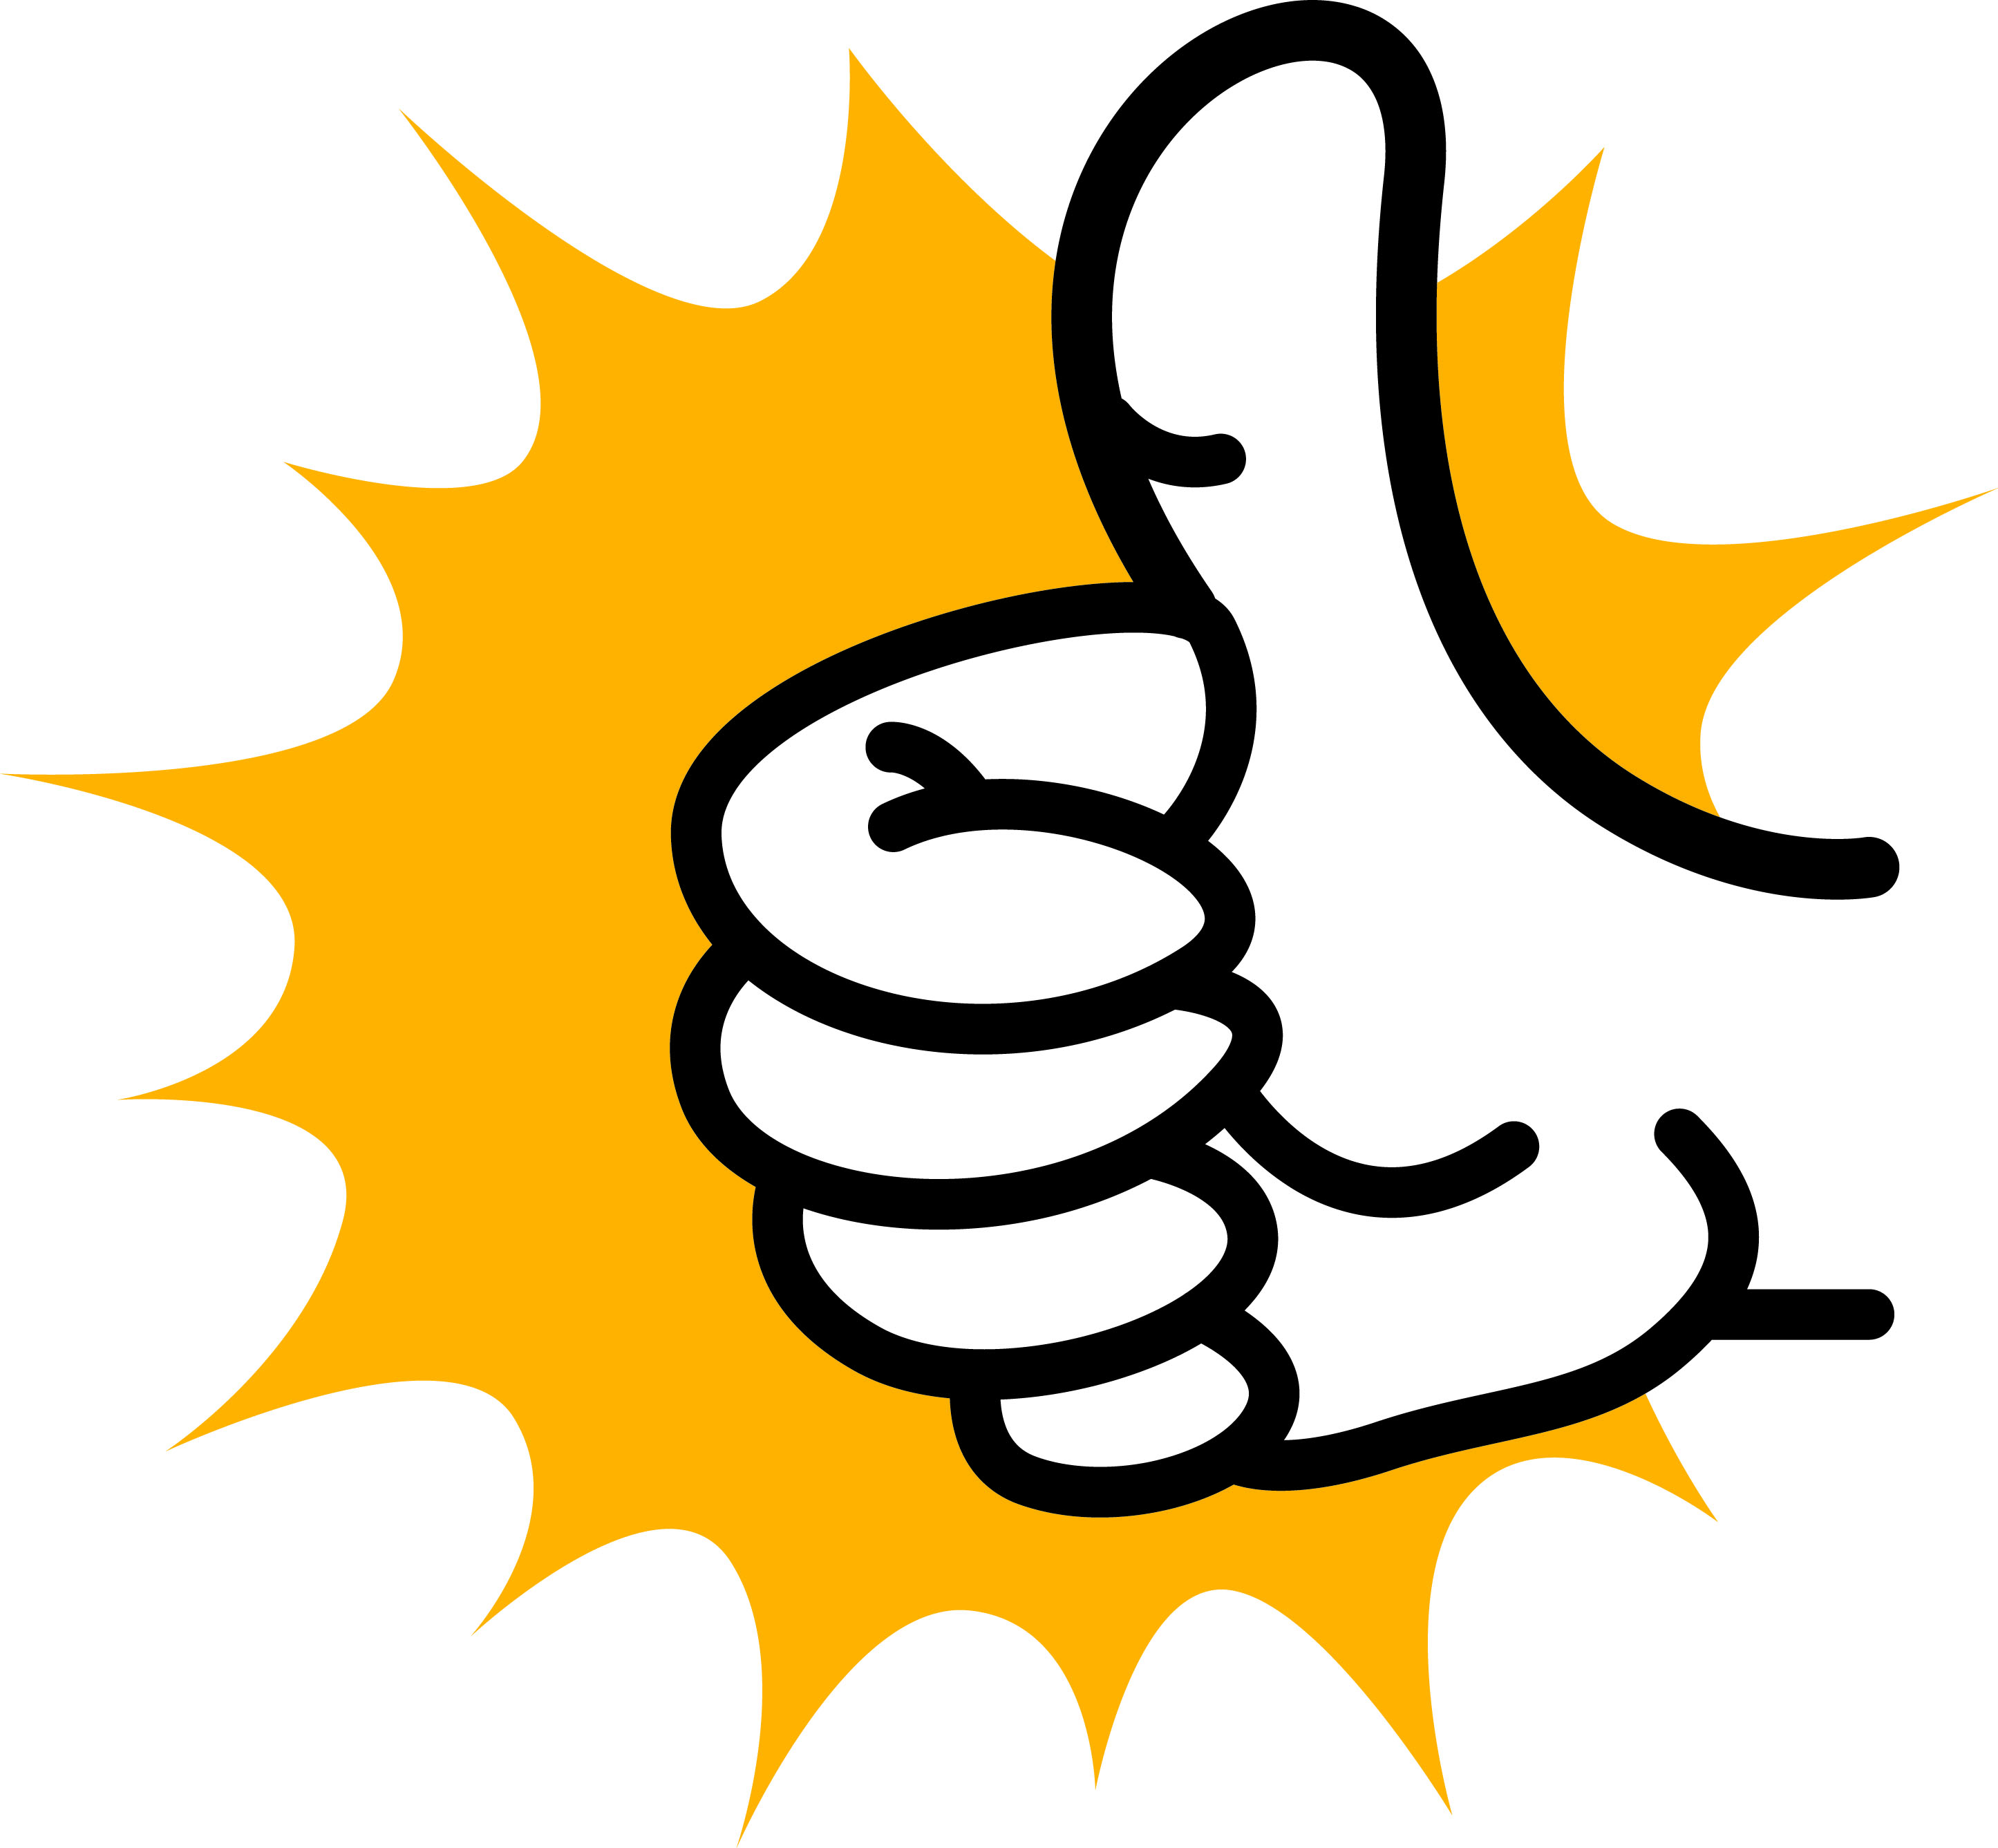  Thumbs Up Clipart ..